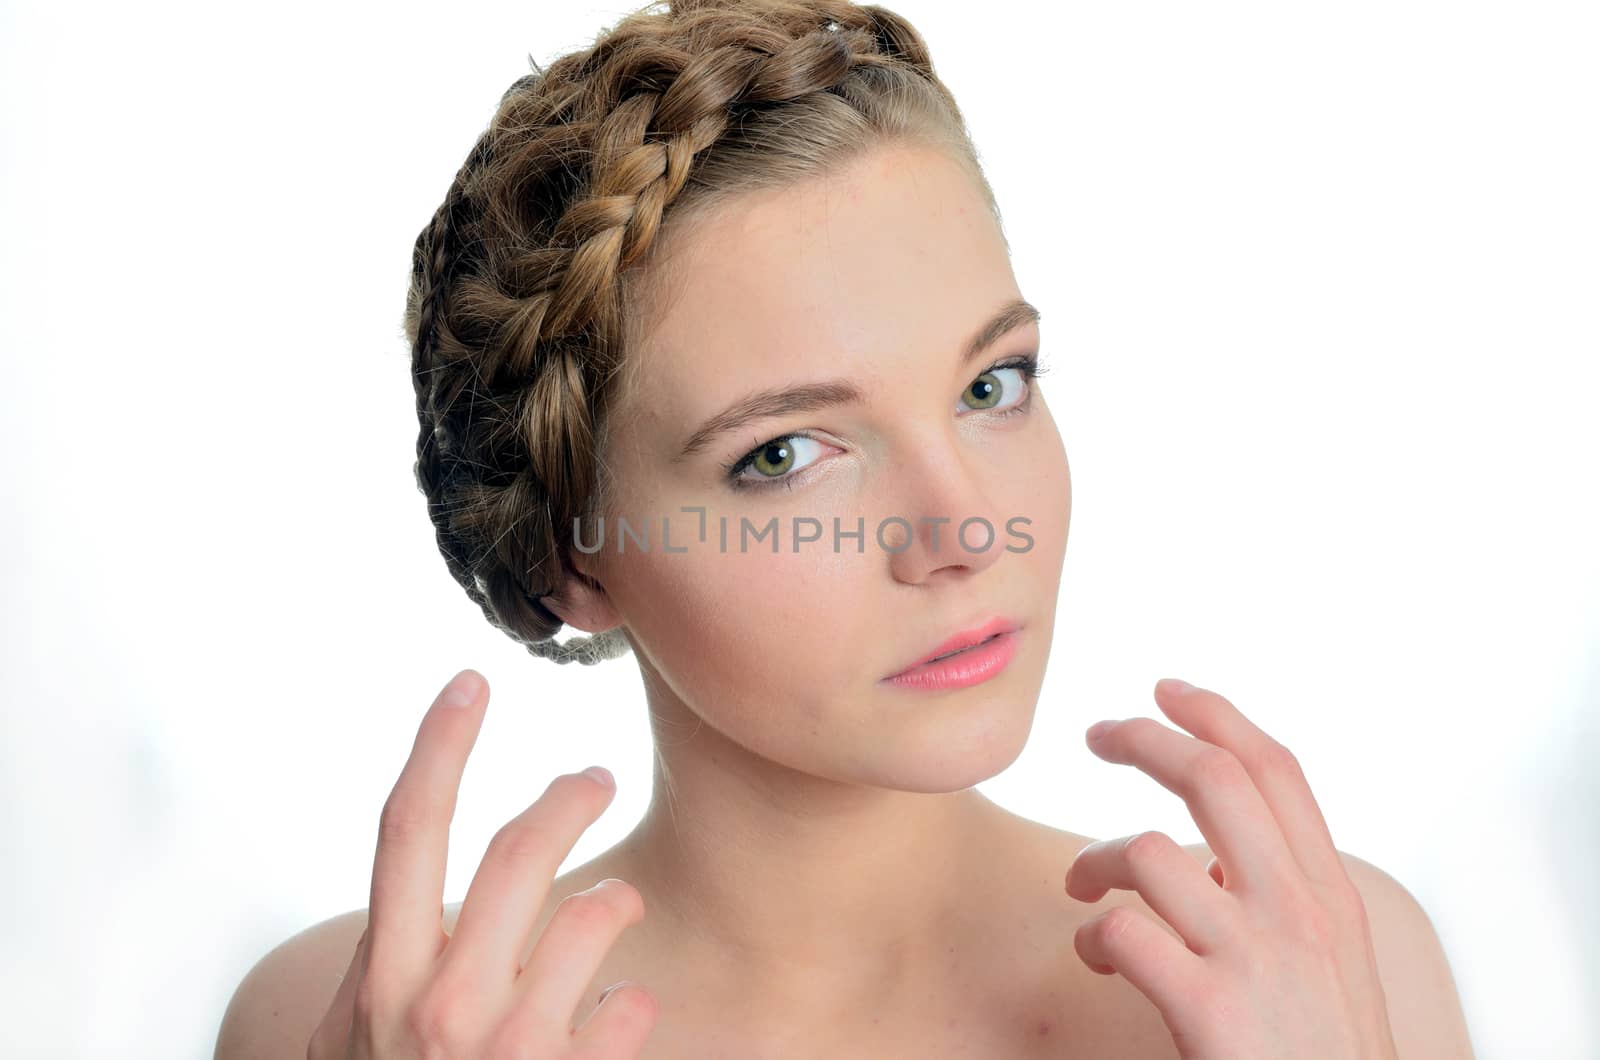 Female model from Poland. Young girl with blond hairs. Portrait with hands gesture.